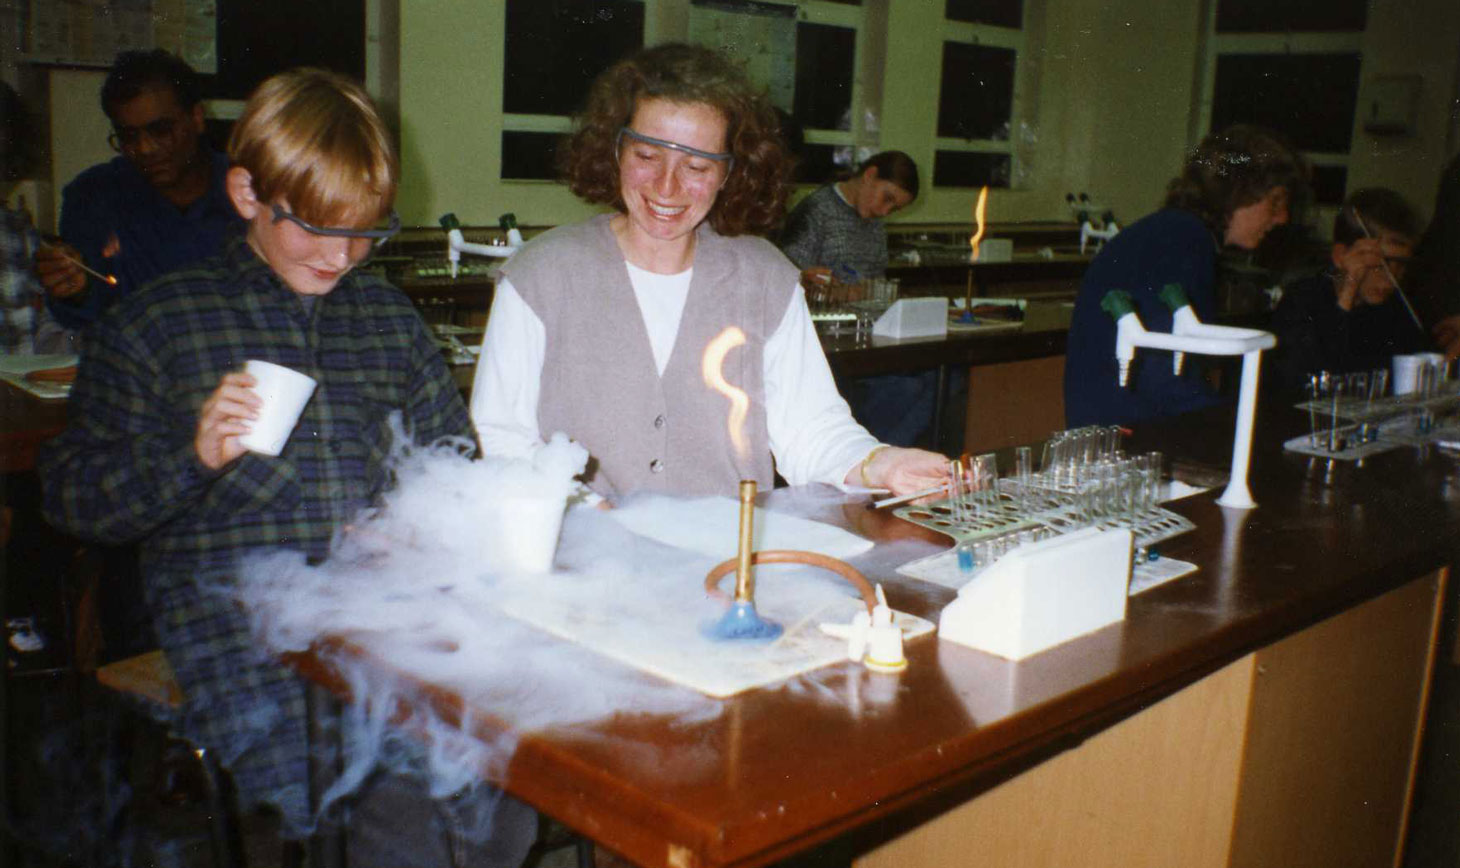 Science experiment - year unknown